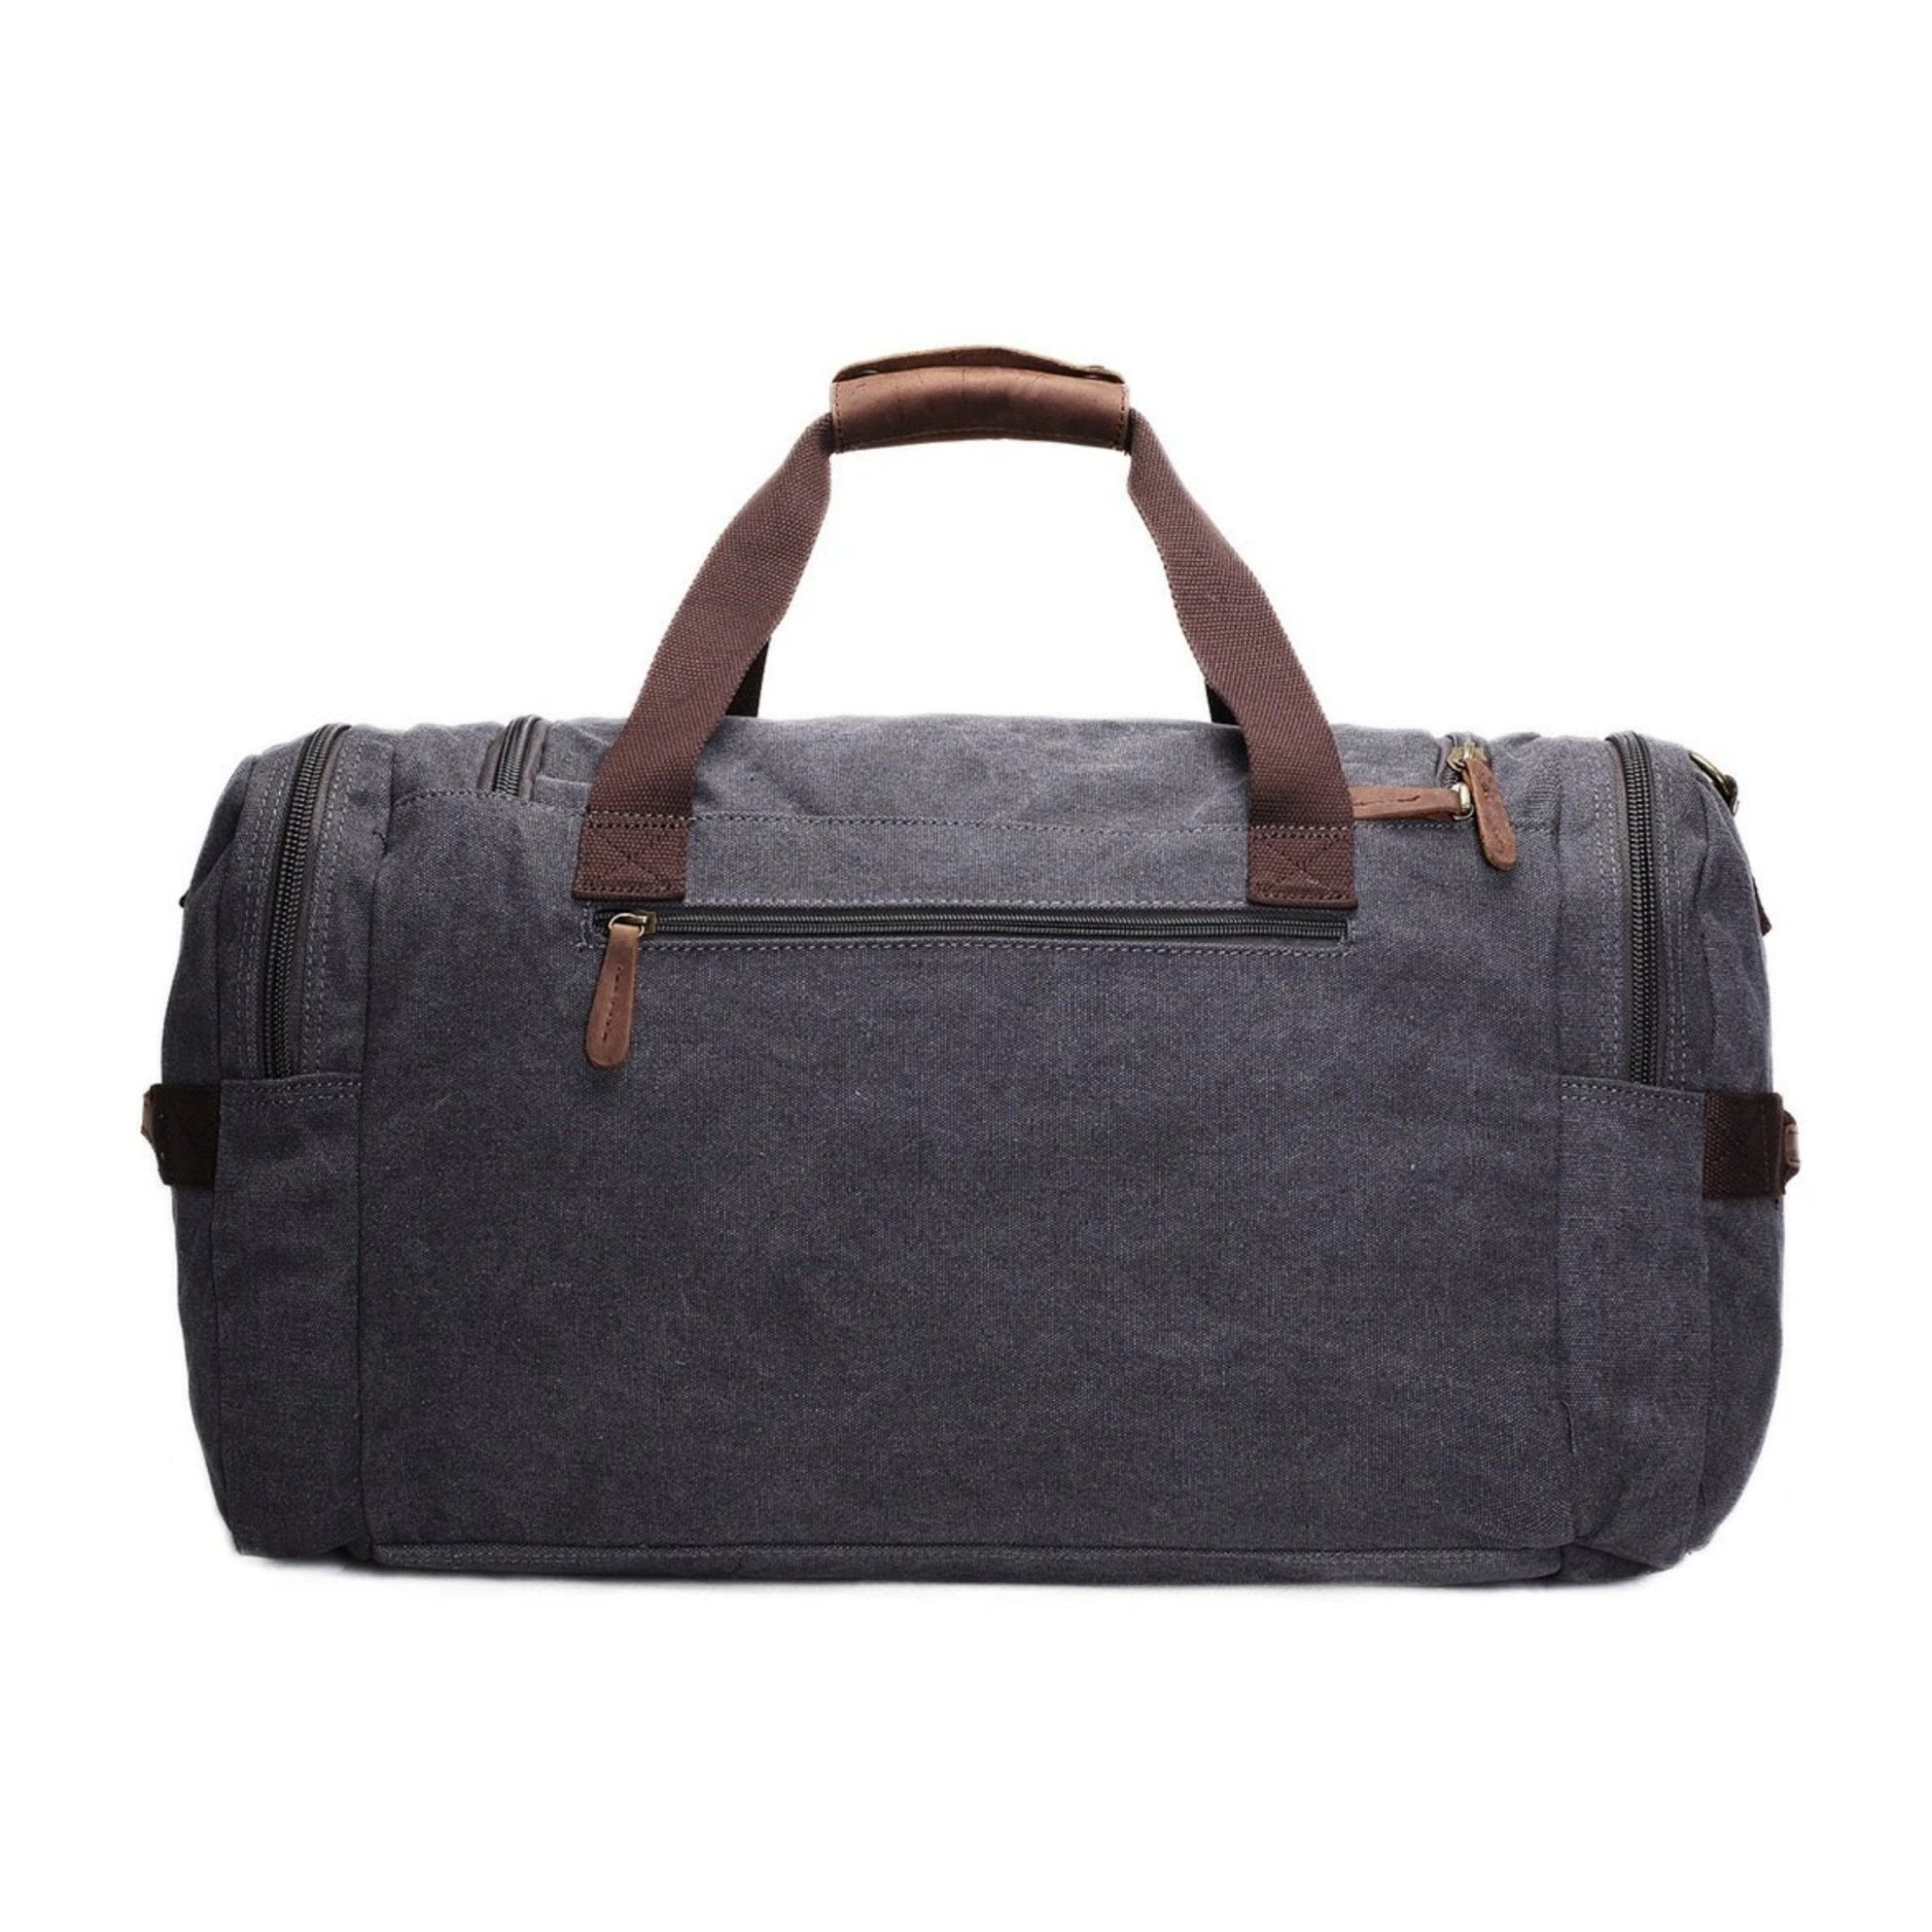 Canvas Leather Travel Military Duffle Bag - Blue Sebe Handmade Leather Bags